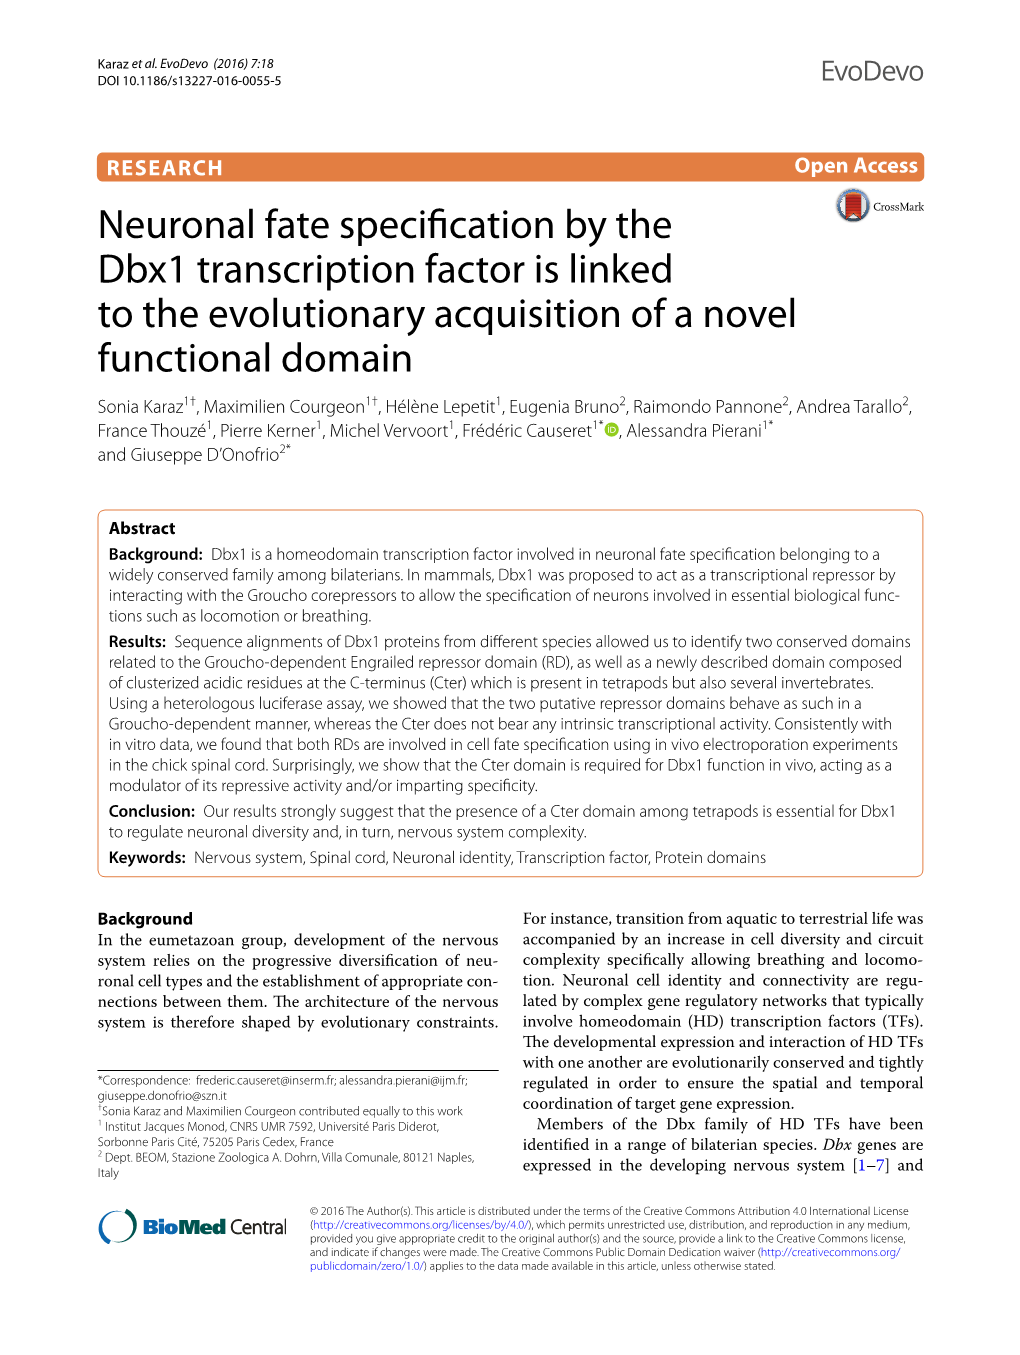 Neuronal Fate Specification by the Dbx1 Transcription Factor Is Linked To